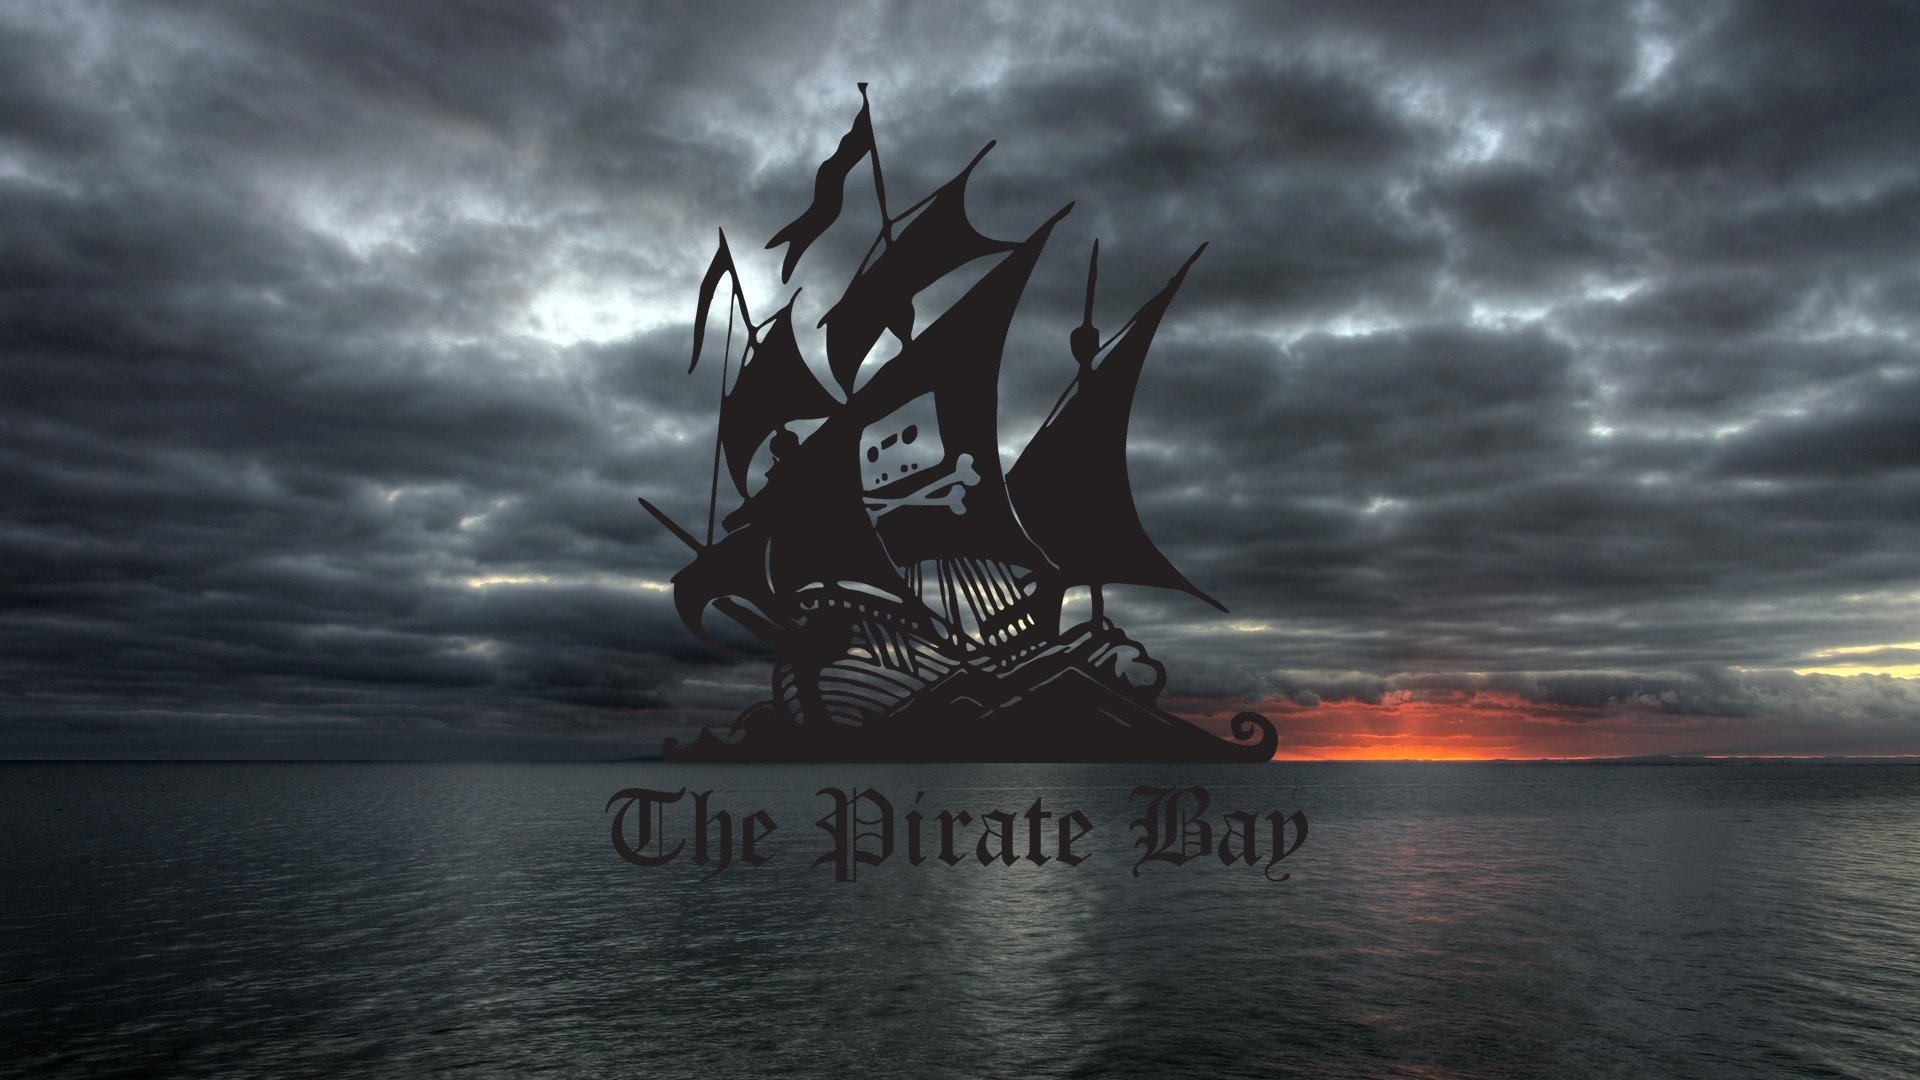 1920x1080 The Pirate Bay HD Wallpapers and Backgrounds